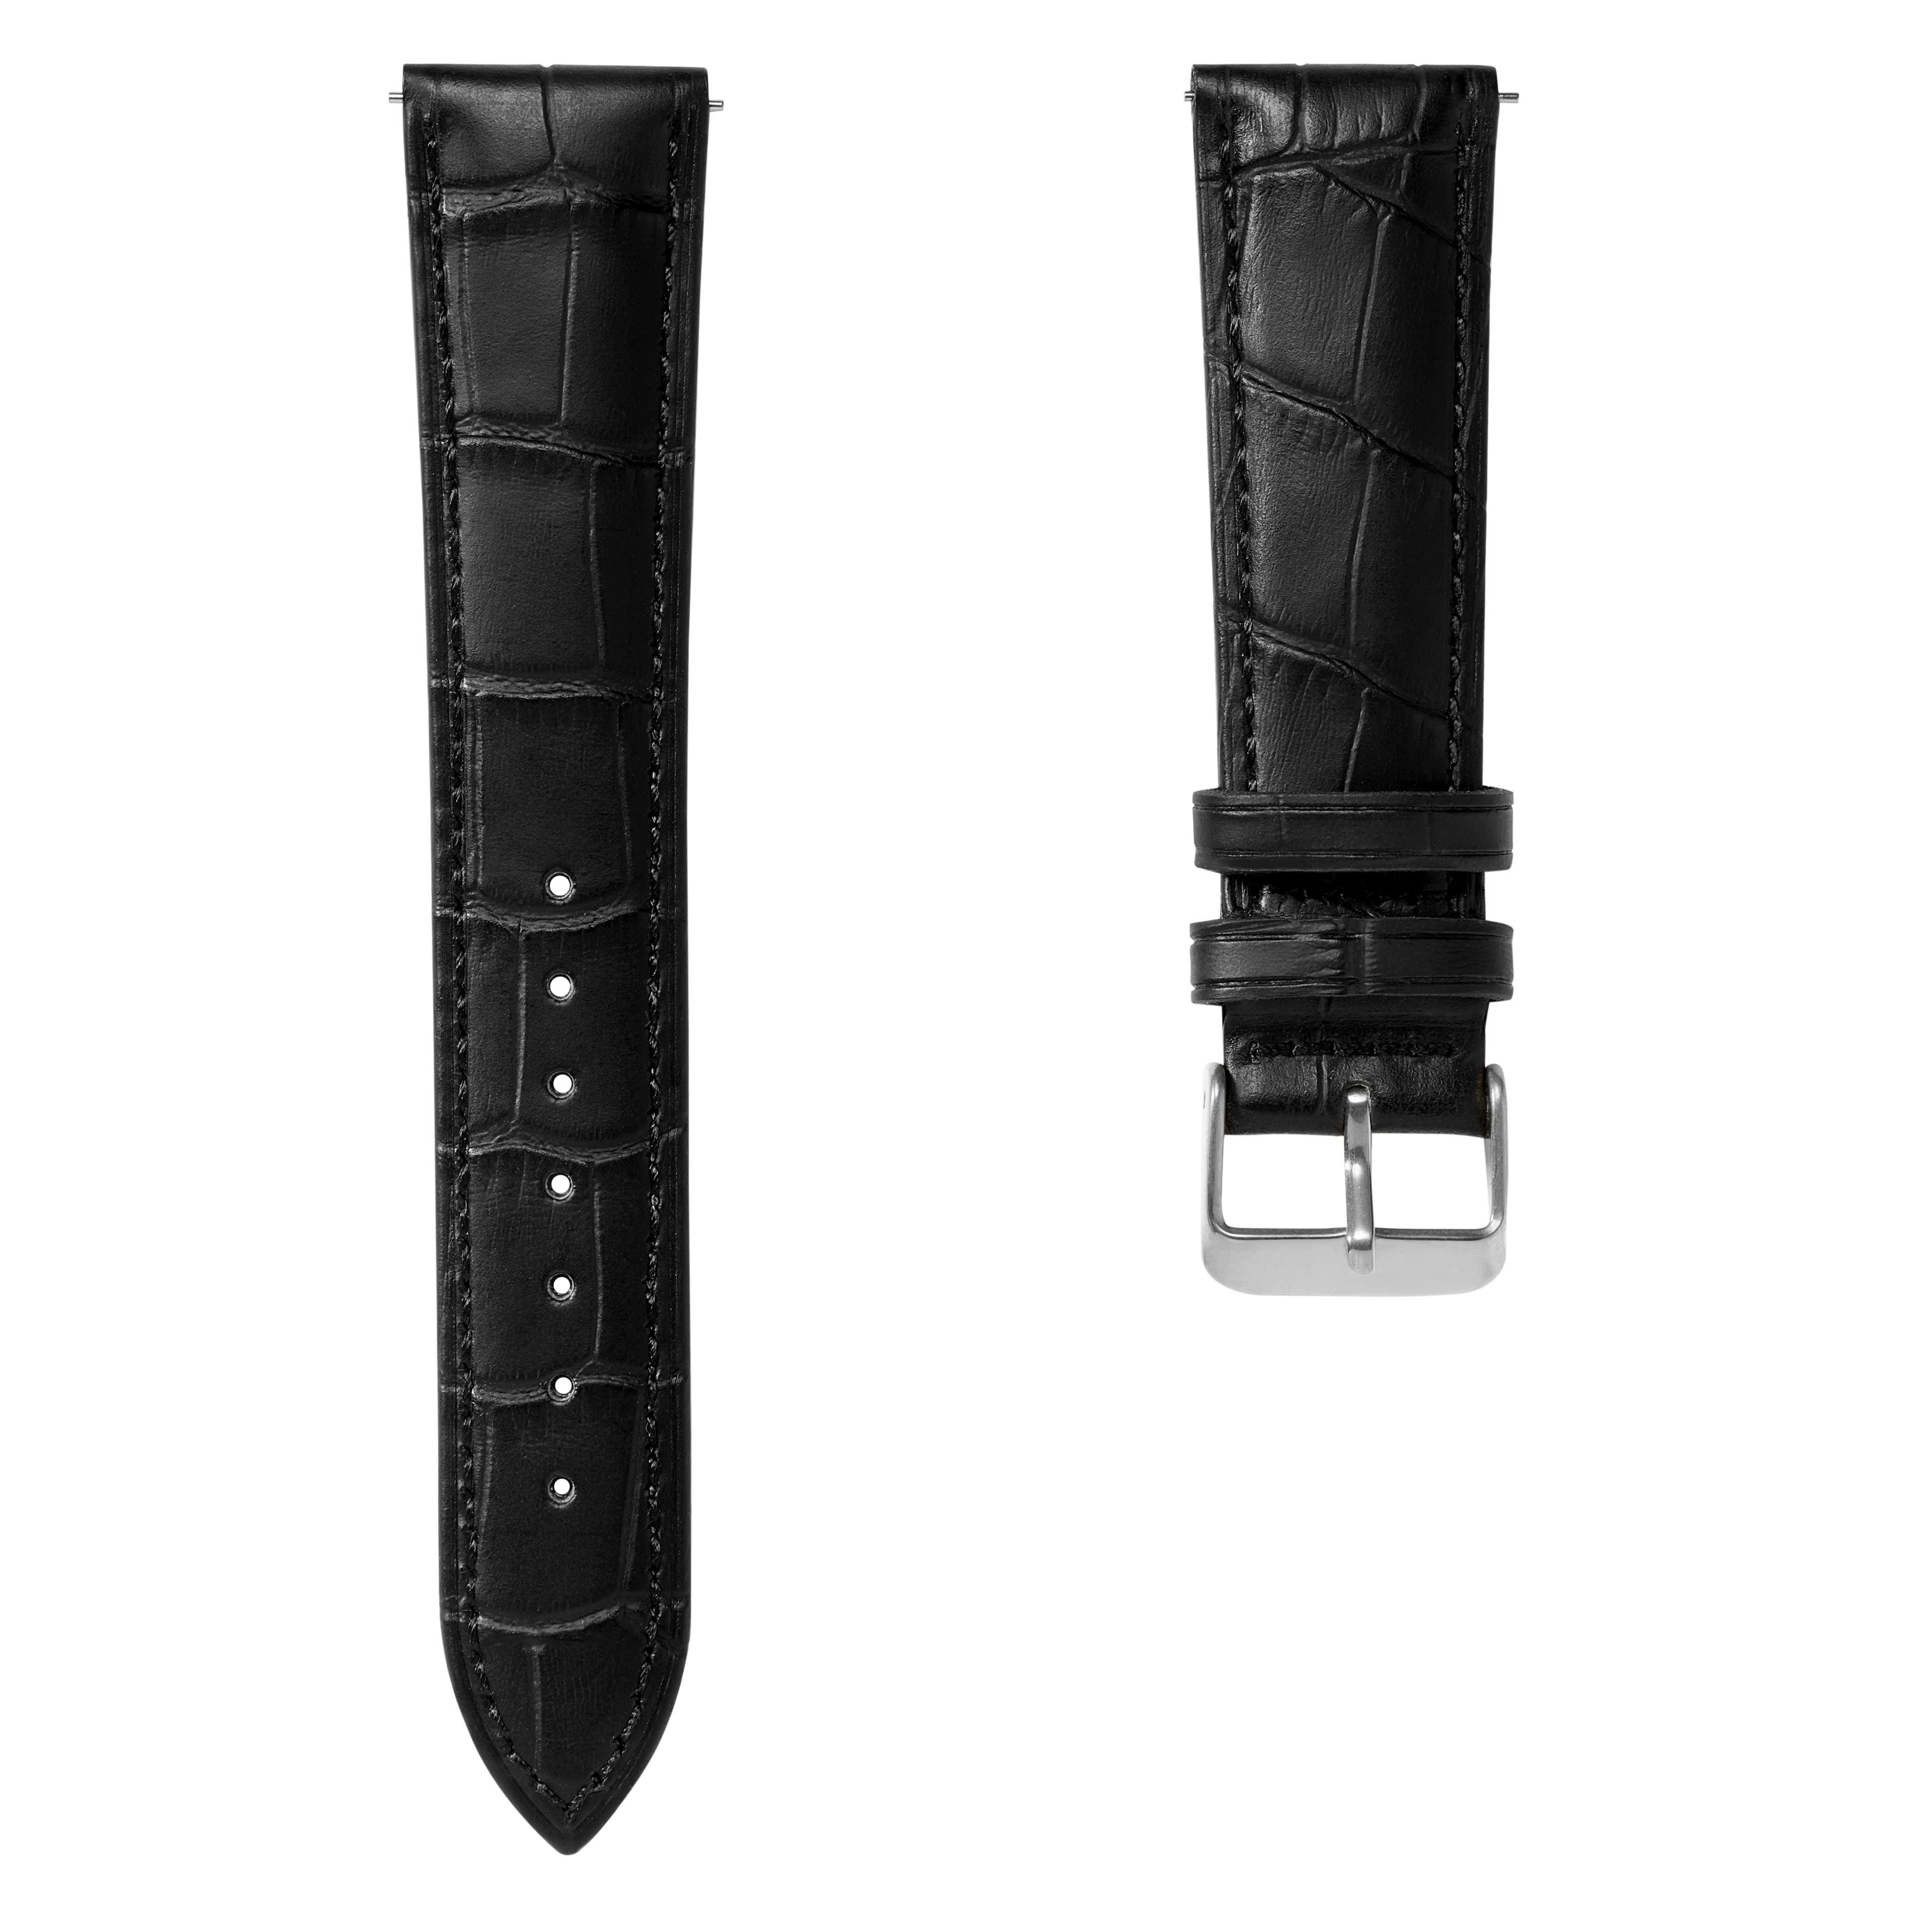 20 mm Crocodile-Embossed Black Leather Watch Strap with Silver-Tone Buckle – Quick Release